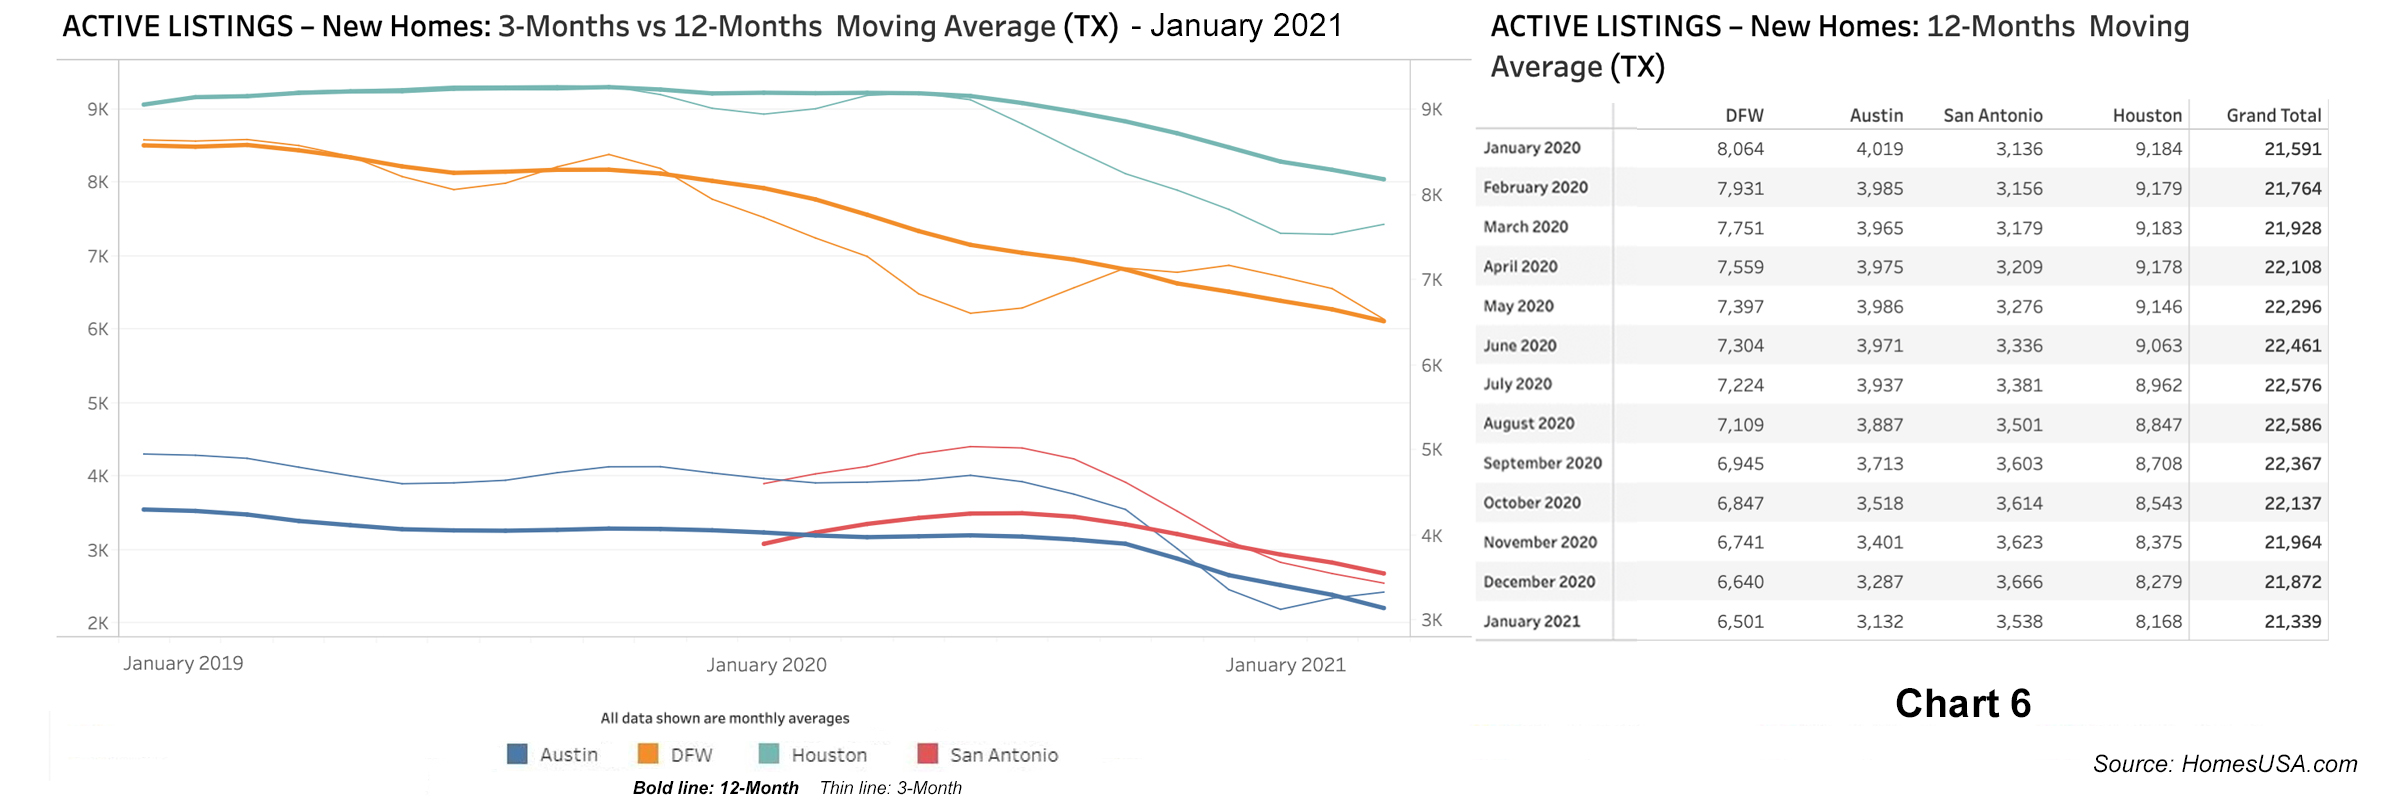 Chart 6: Active Listings for New Home Sales - January 2021